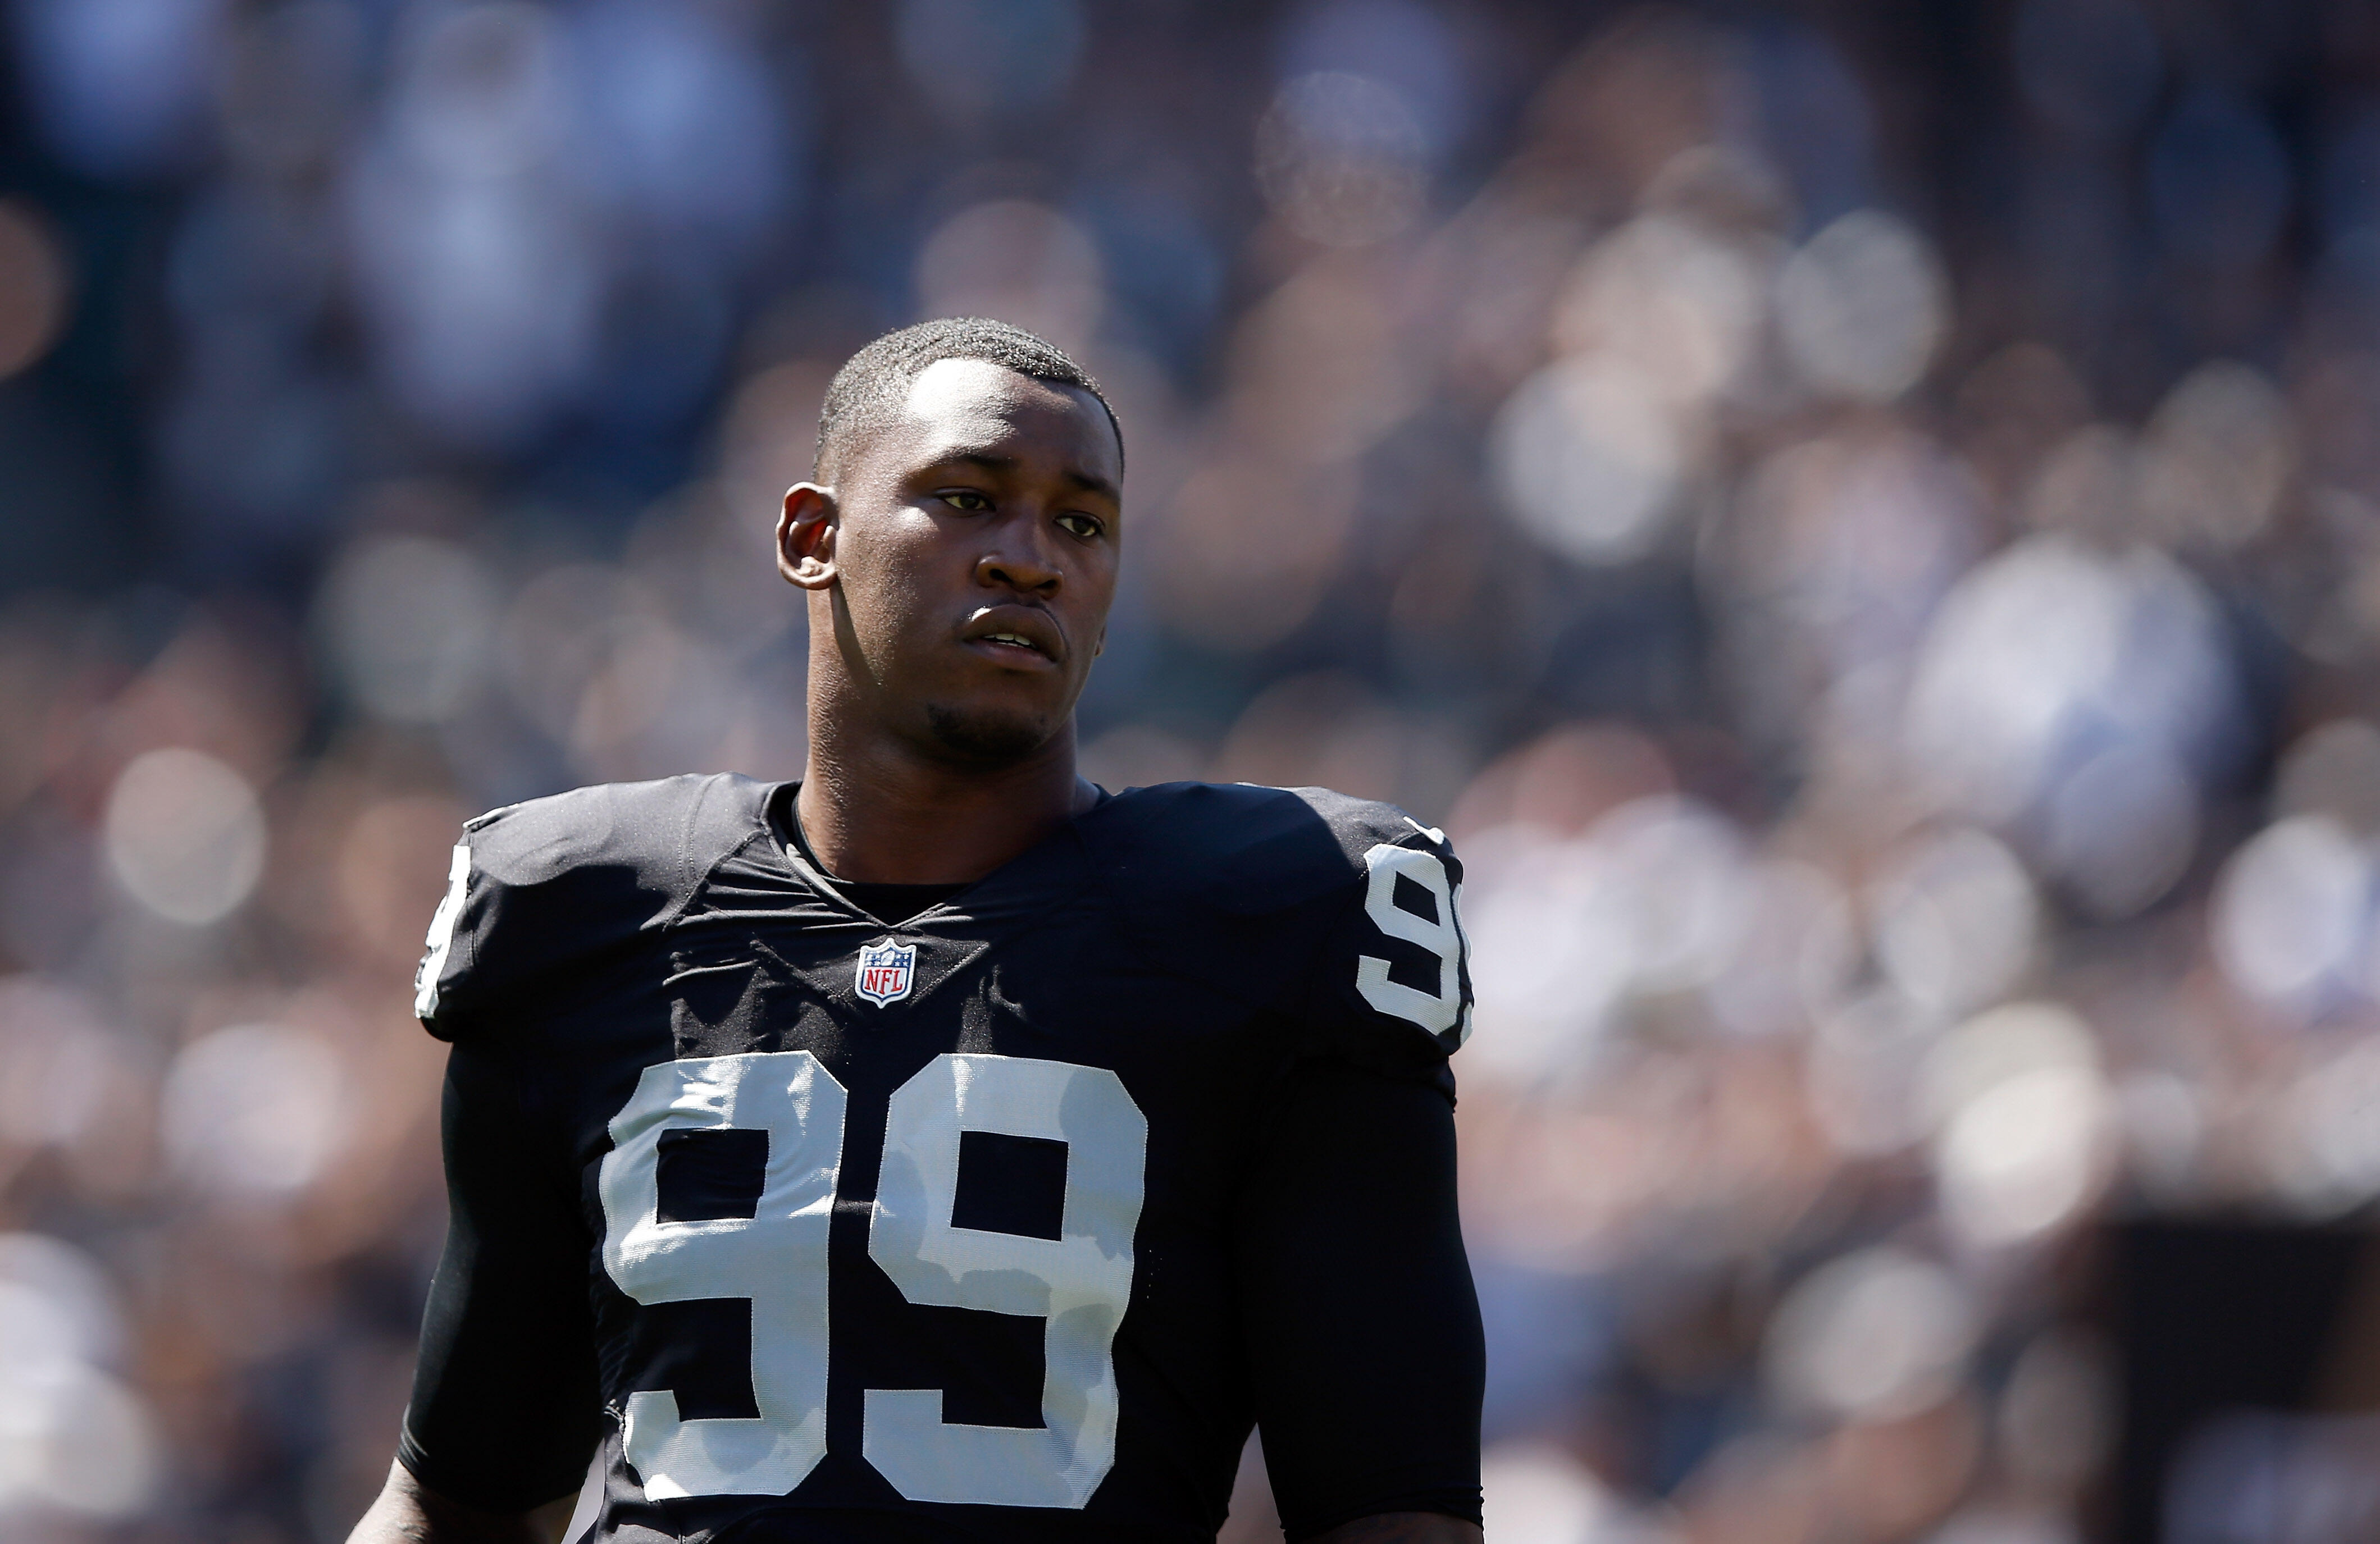 OAKLAND, CA - SEPTEMBER 20:  Aldon Smith #99 of the Oakland Raiders stands on the field before their game against the Baltimore Ravens at O.co Coliseum on September 20, 2015 in Oakland, California.  (Photo by Ezra Shaw/Getty Images)